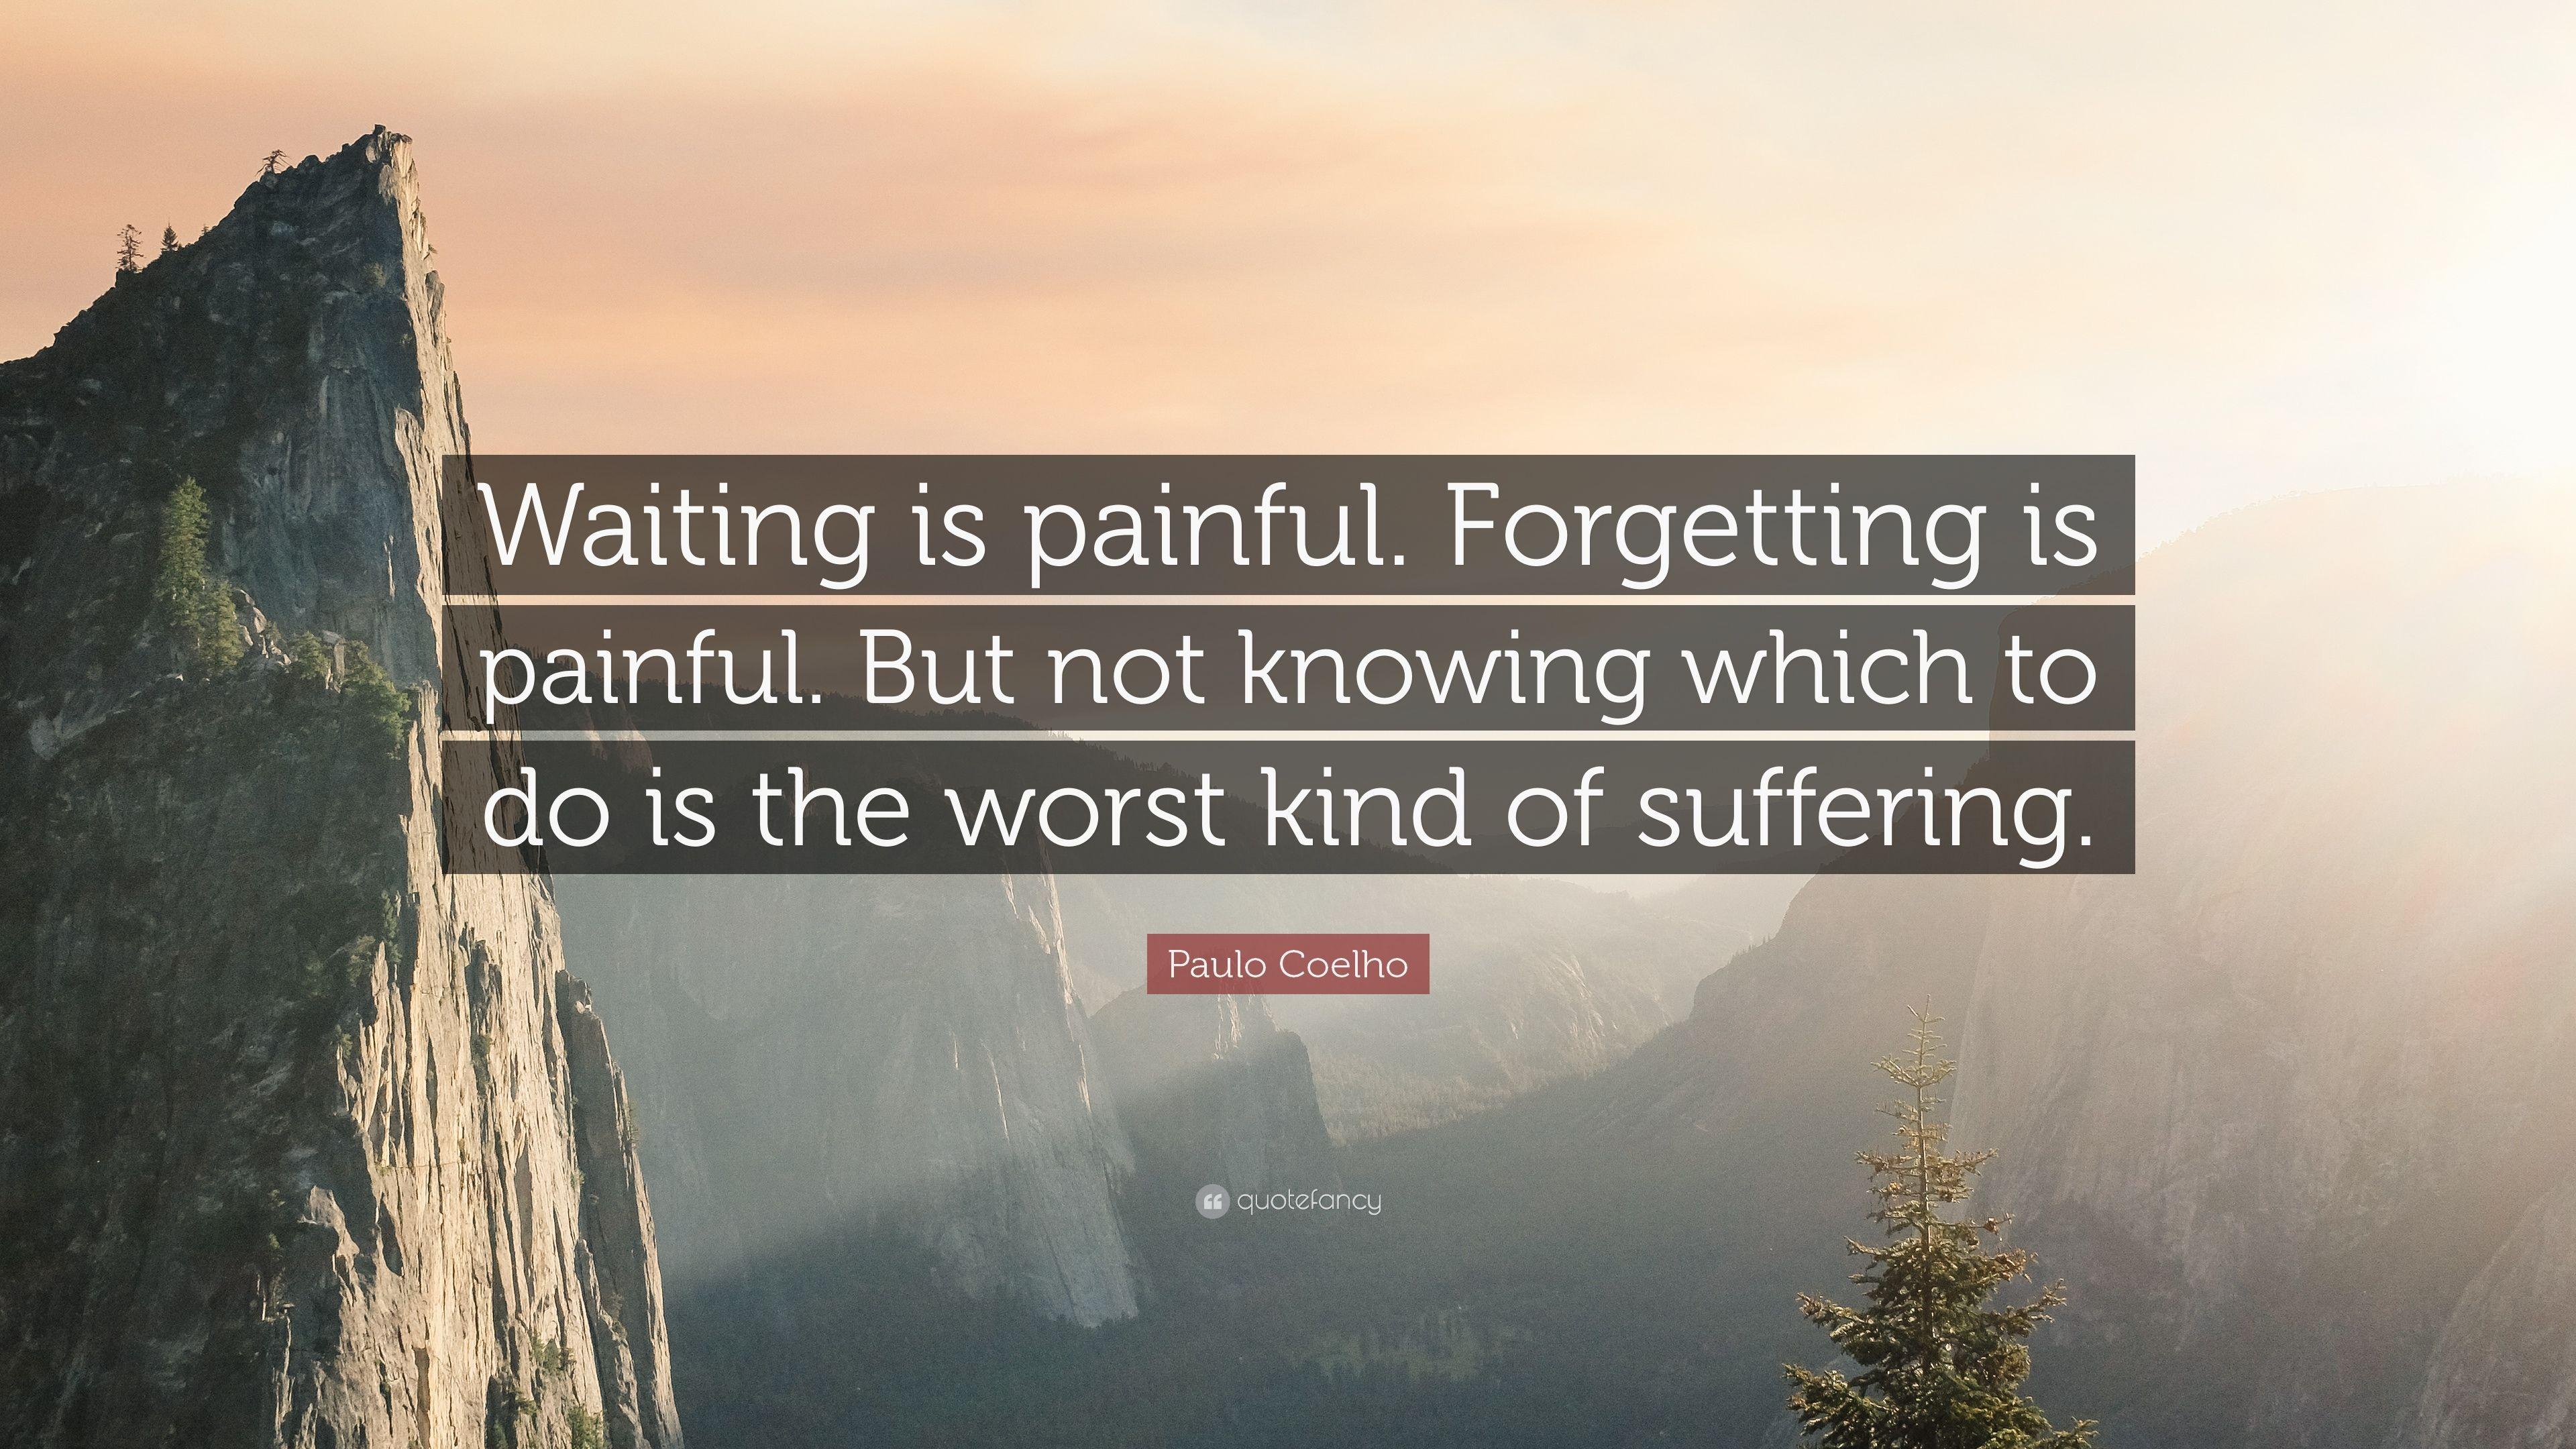 Paulo Coelho Quote: “Waiting is painful. Forgetting is painful